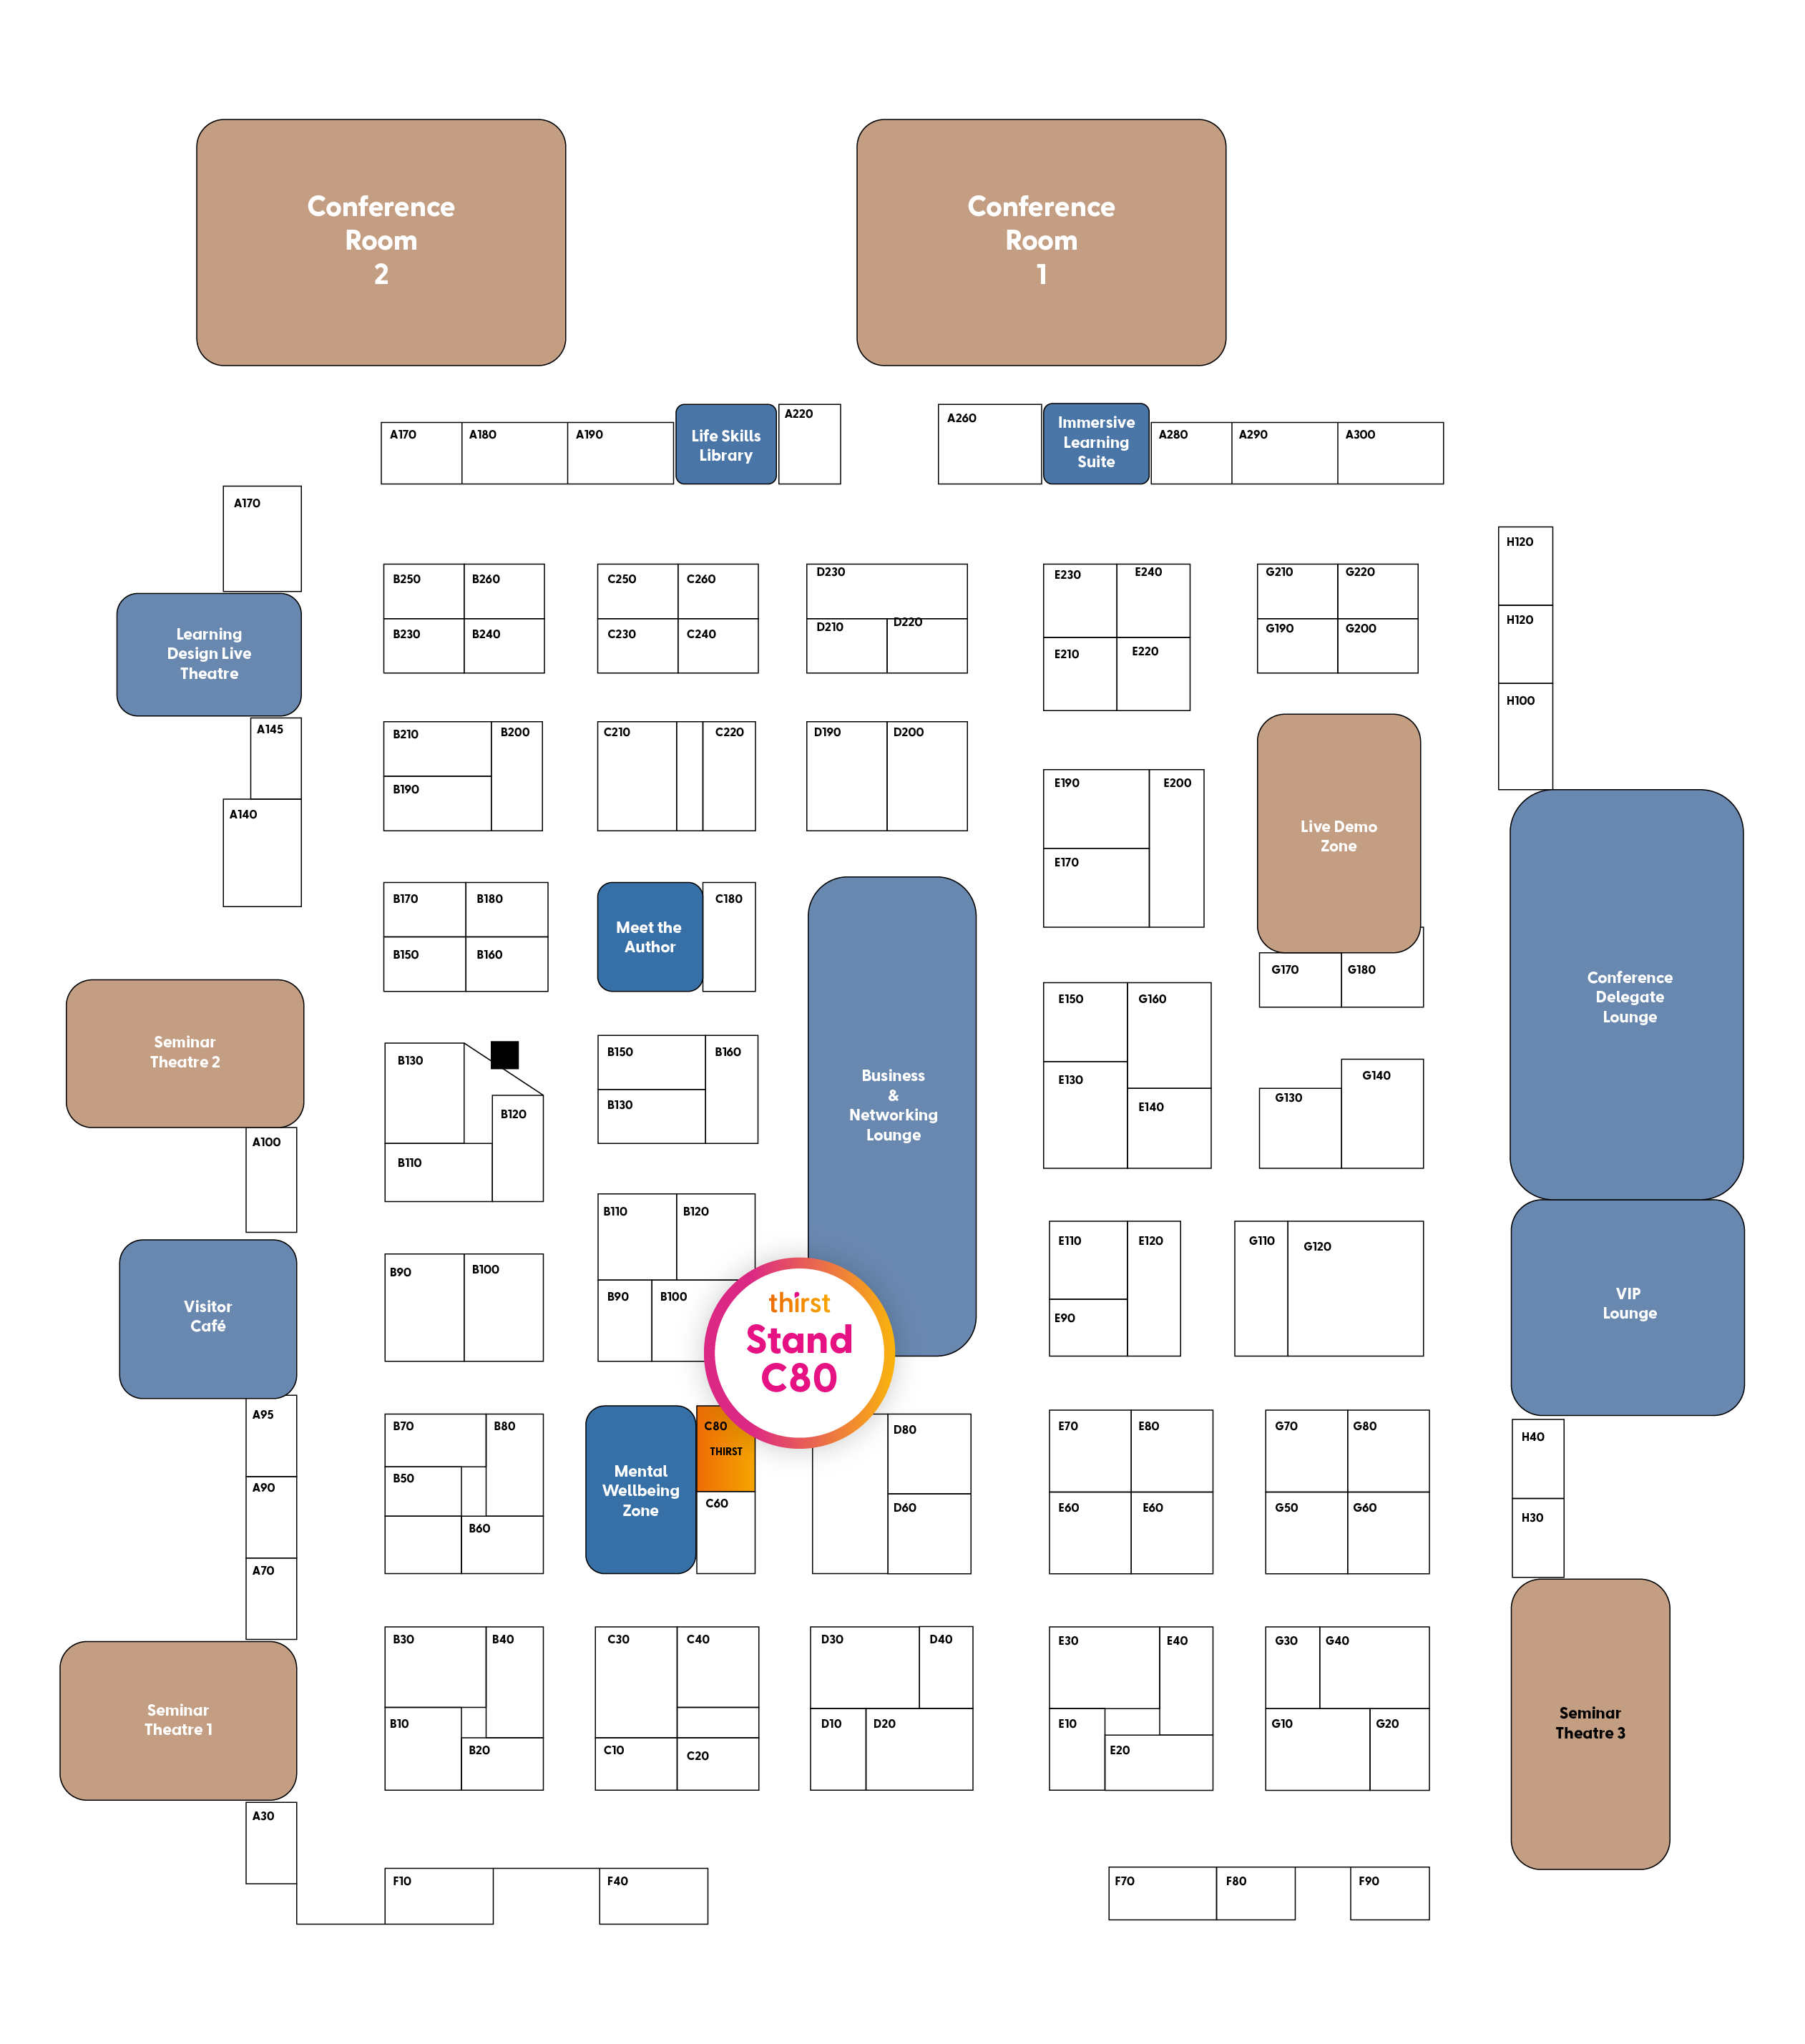 World of Learning Exhibition and Conference 2023 - Floor Plan